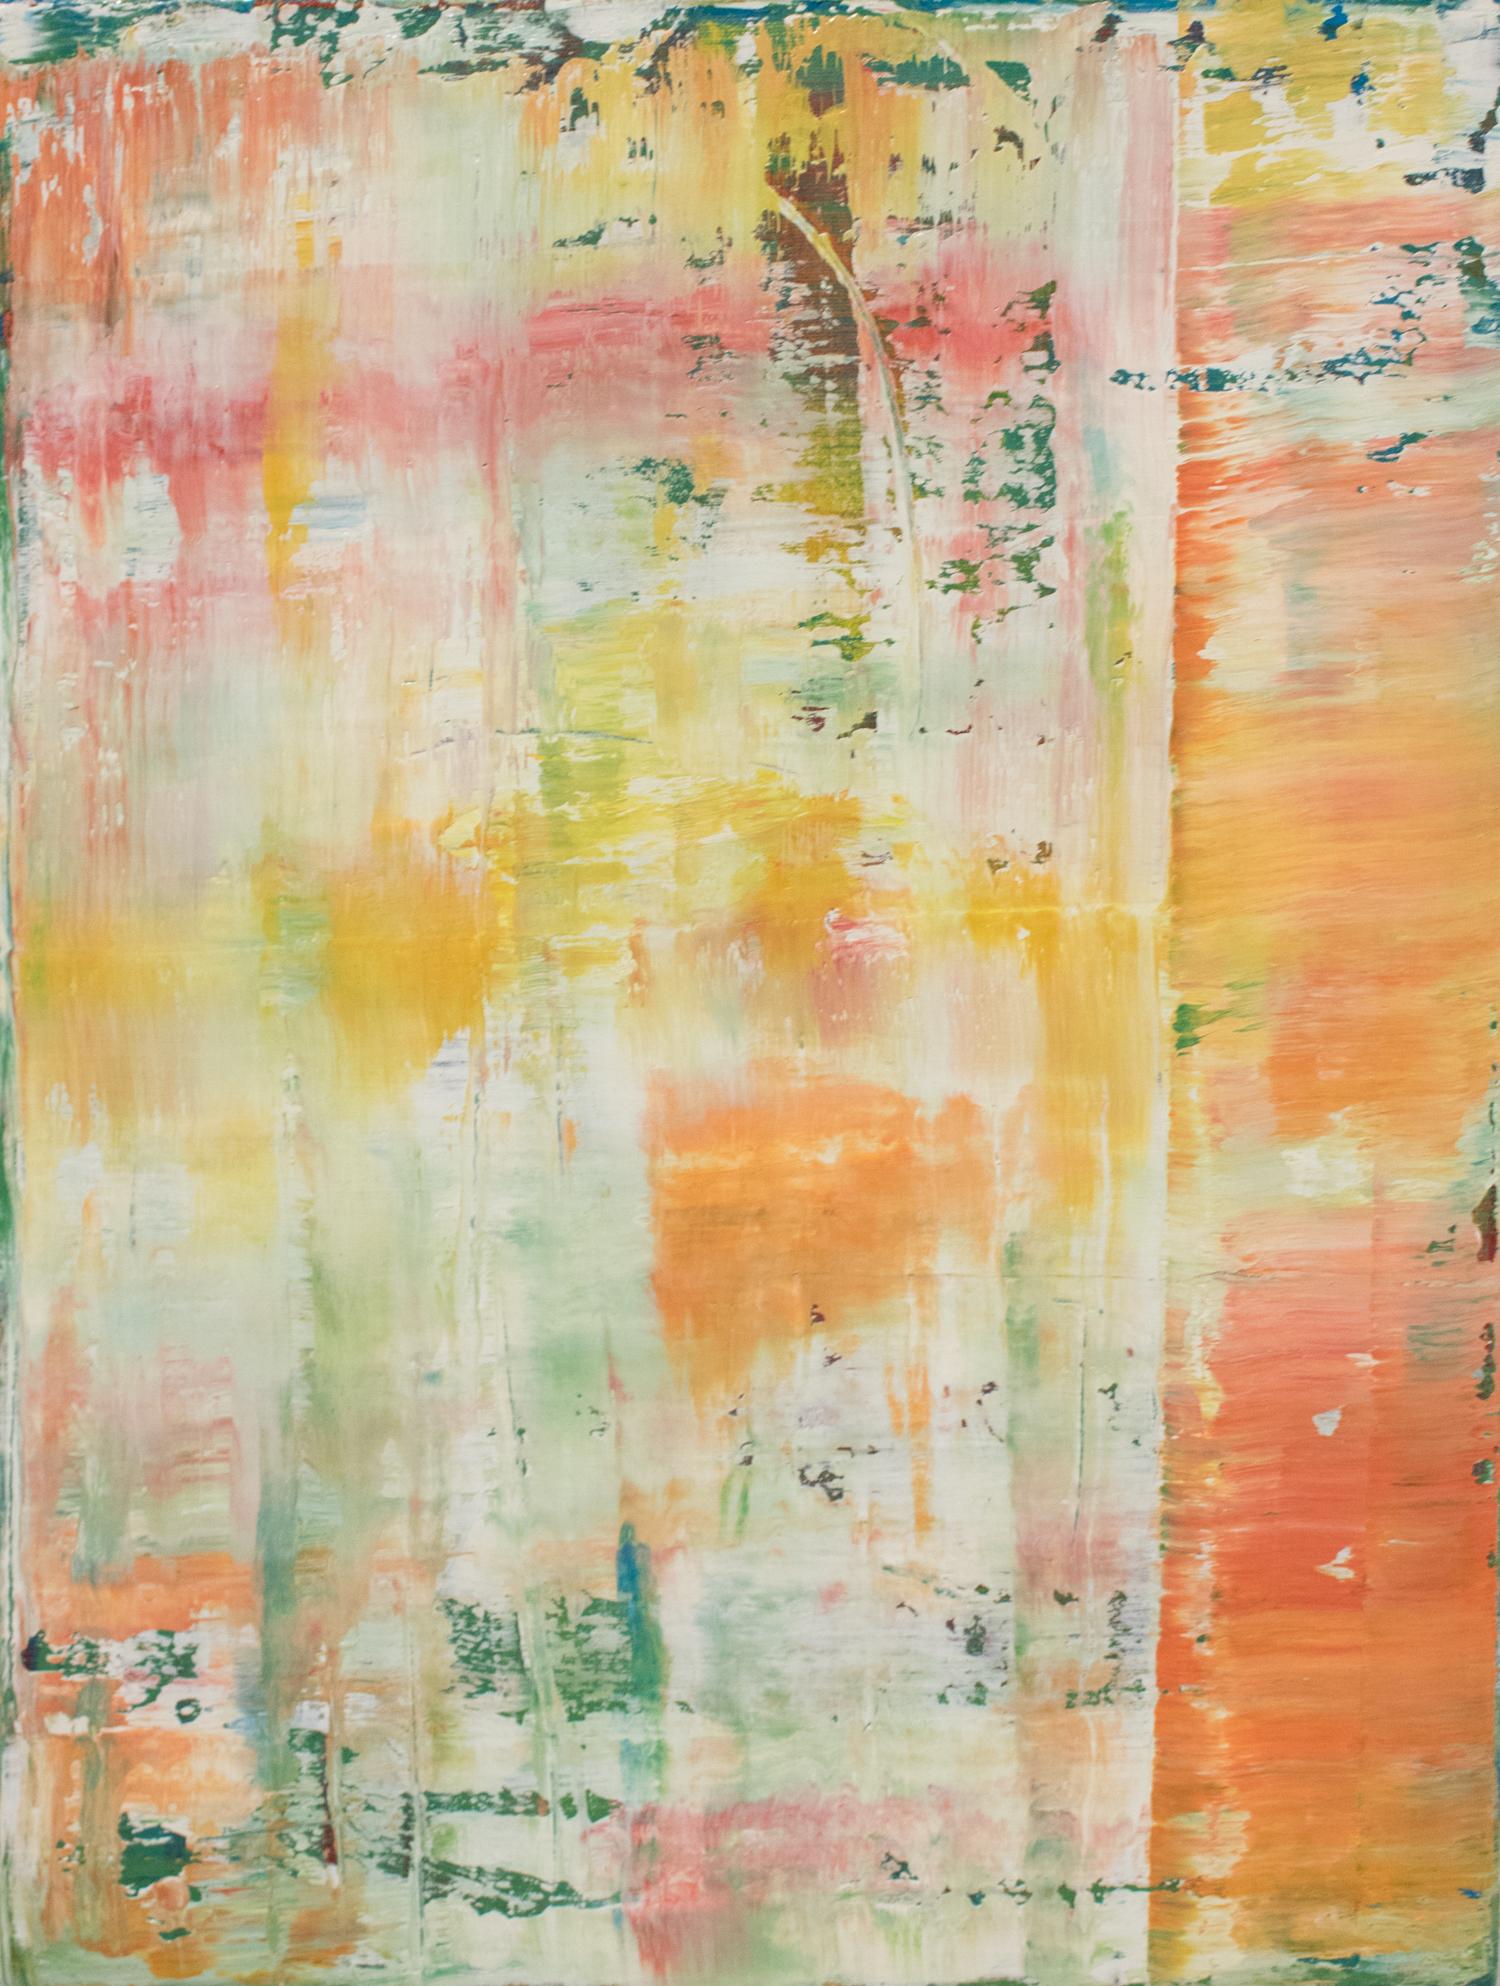 UNTITLED NO. 4 - Oil on Canvas, contemporary abstract pink, green, white, yellow - Painting by Yuri Figueroa